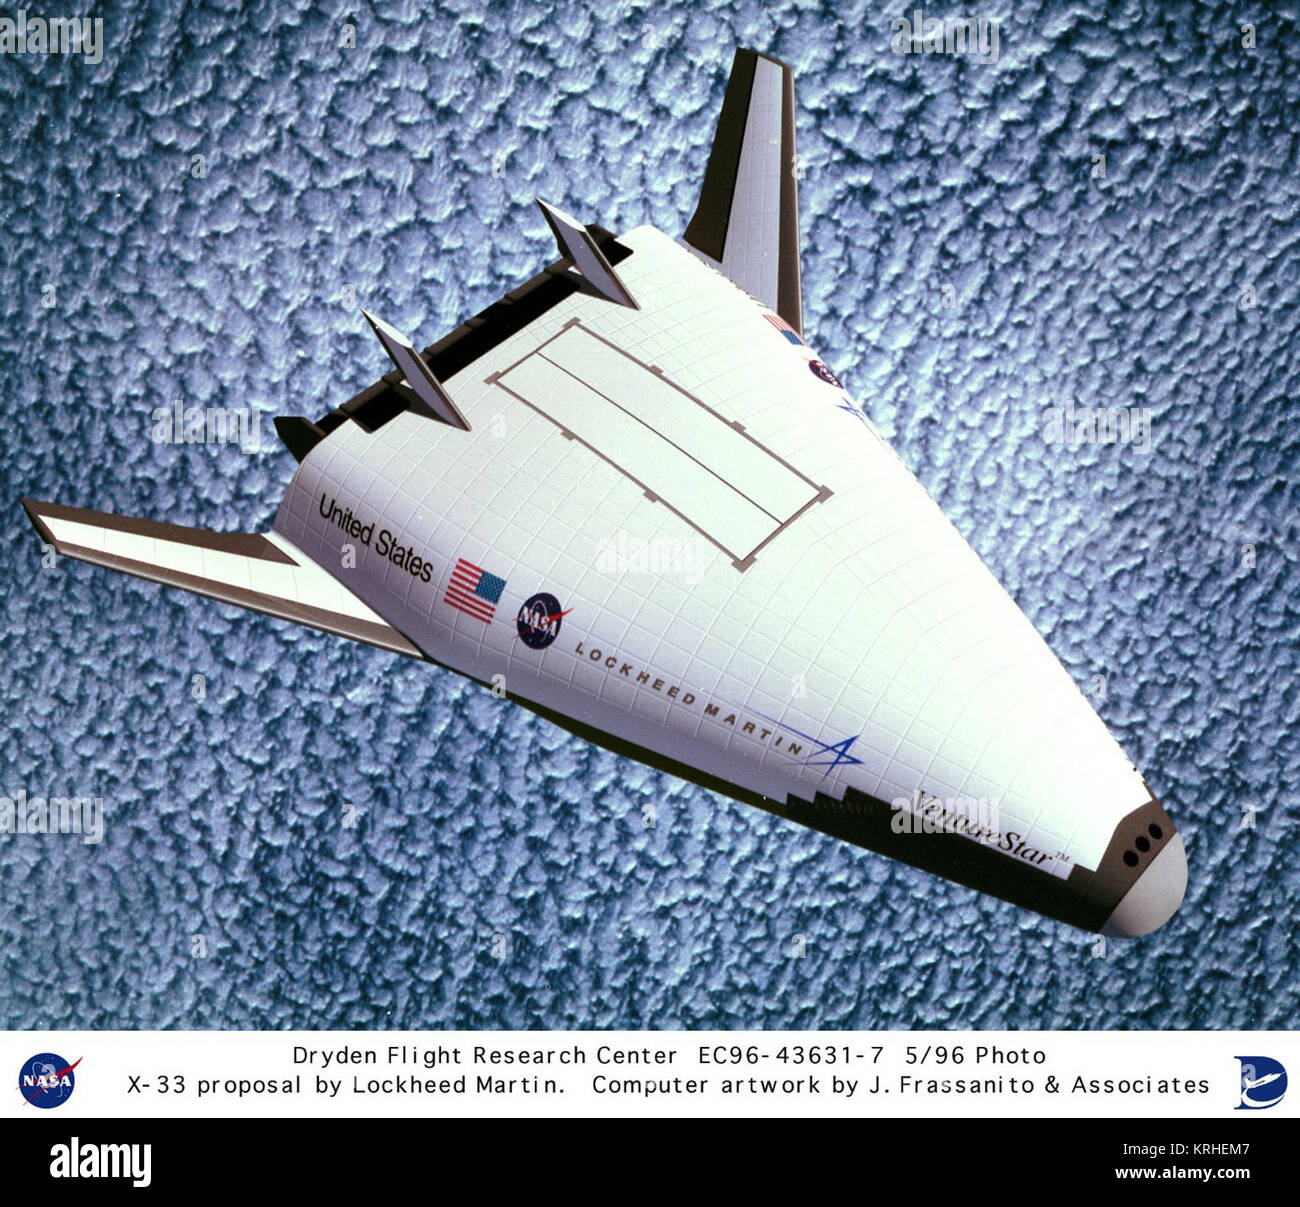 This artist's rendering depicts the Lockheed Martin X-33 for a technology demonstrator of a Single-Stage-To-Orbit (SSTO) Reusable Launch Vehicle (RLV), as submitted in the aerospace company's original proposal. NASA selected Lockheed Martin's design on 2 July 1996. NASA's Dryden Flight research Center, Edwards, California, was to have had a key role in the development and flight testing of the X-33. The RLV technology program was a cooperative agreement between NASA and industry. The goal of the RLV technology program was to enable significant reductions in the cost of access to space, and to  Stock Photo